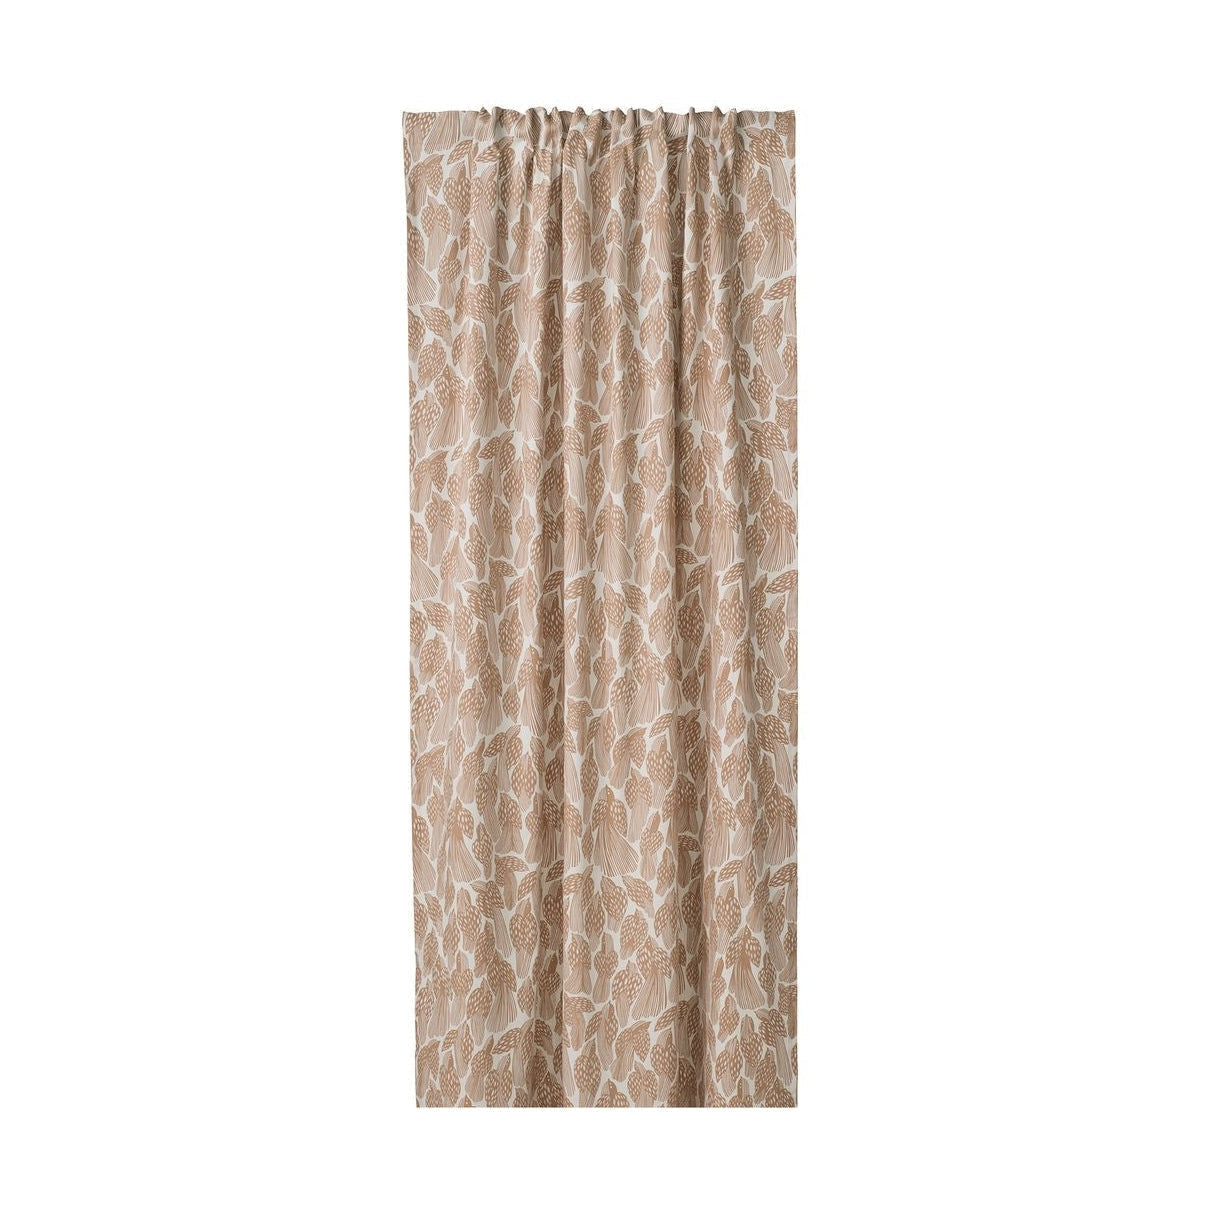 Spira Birds Curtain With Multiband, Grate